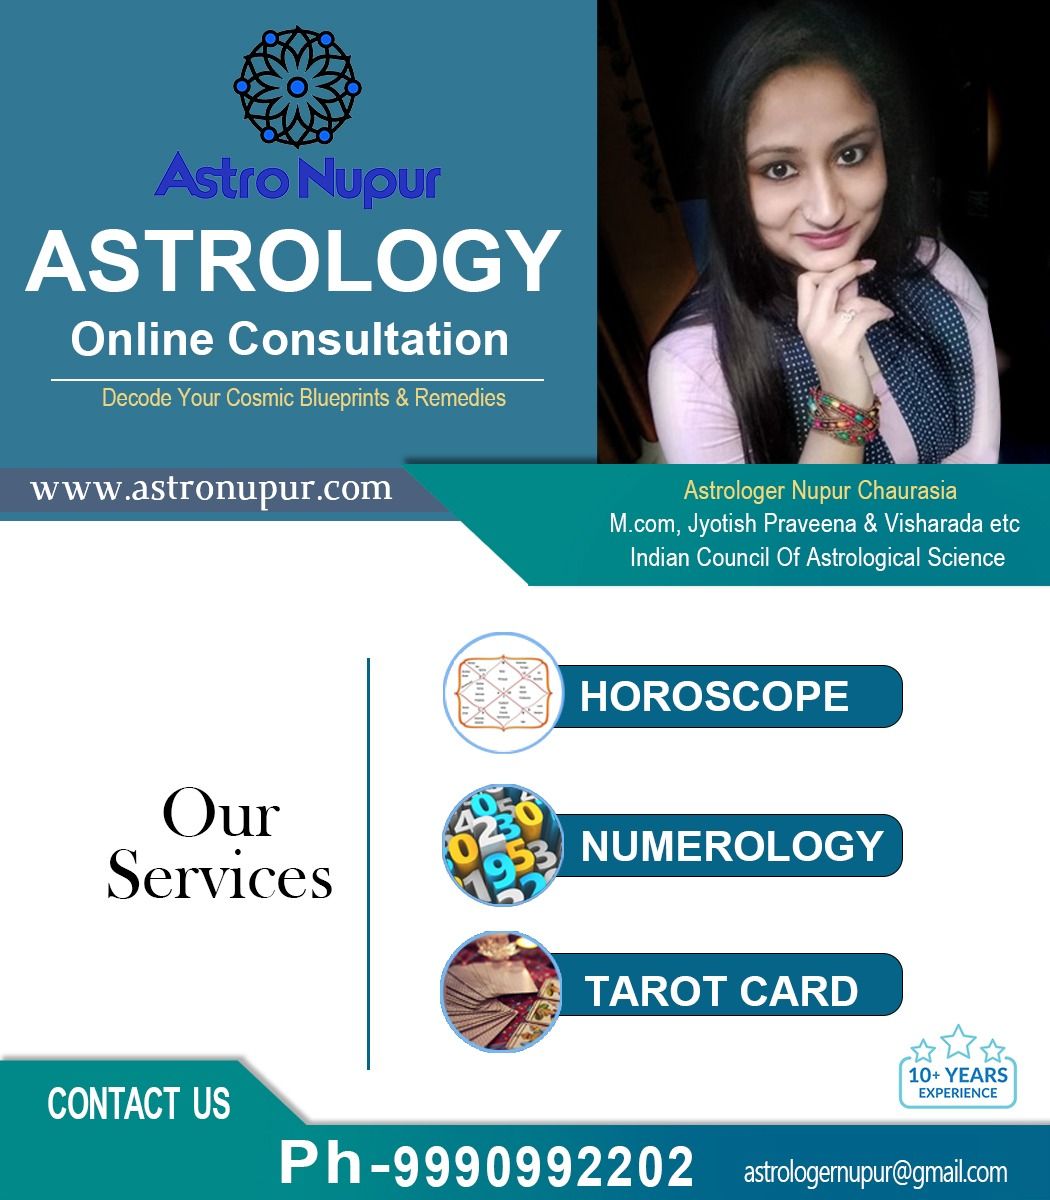 You have been disappointed by many Astrologers